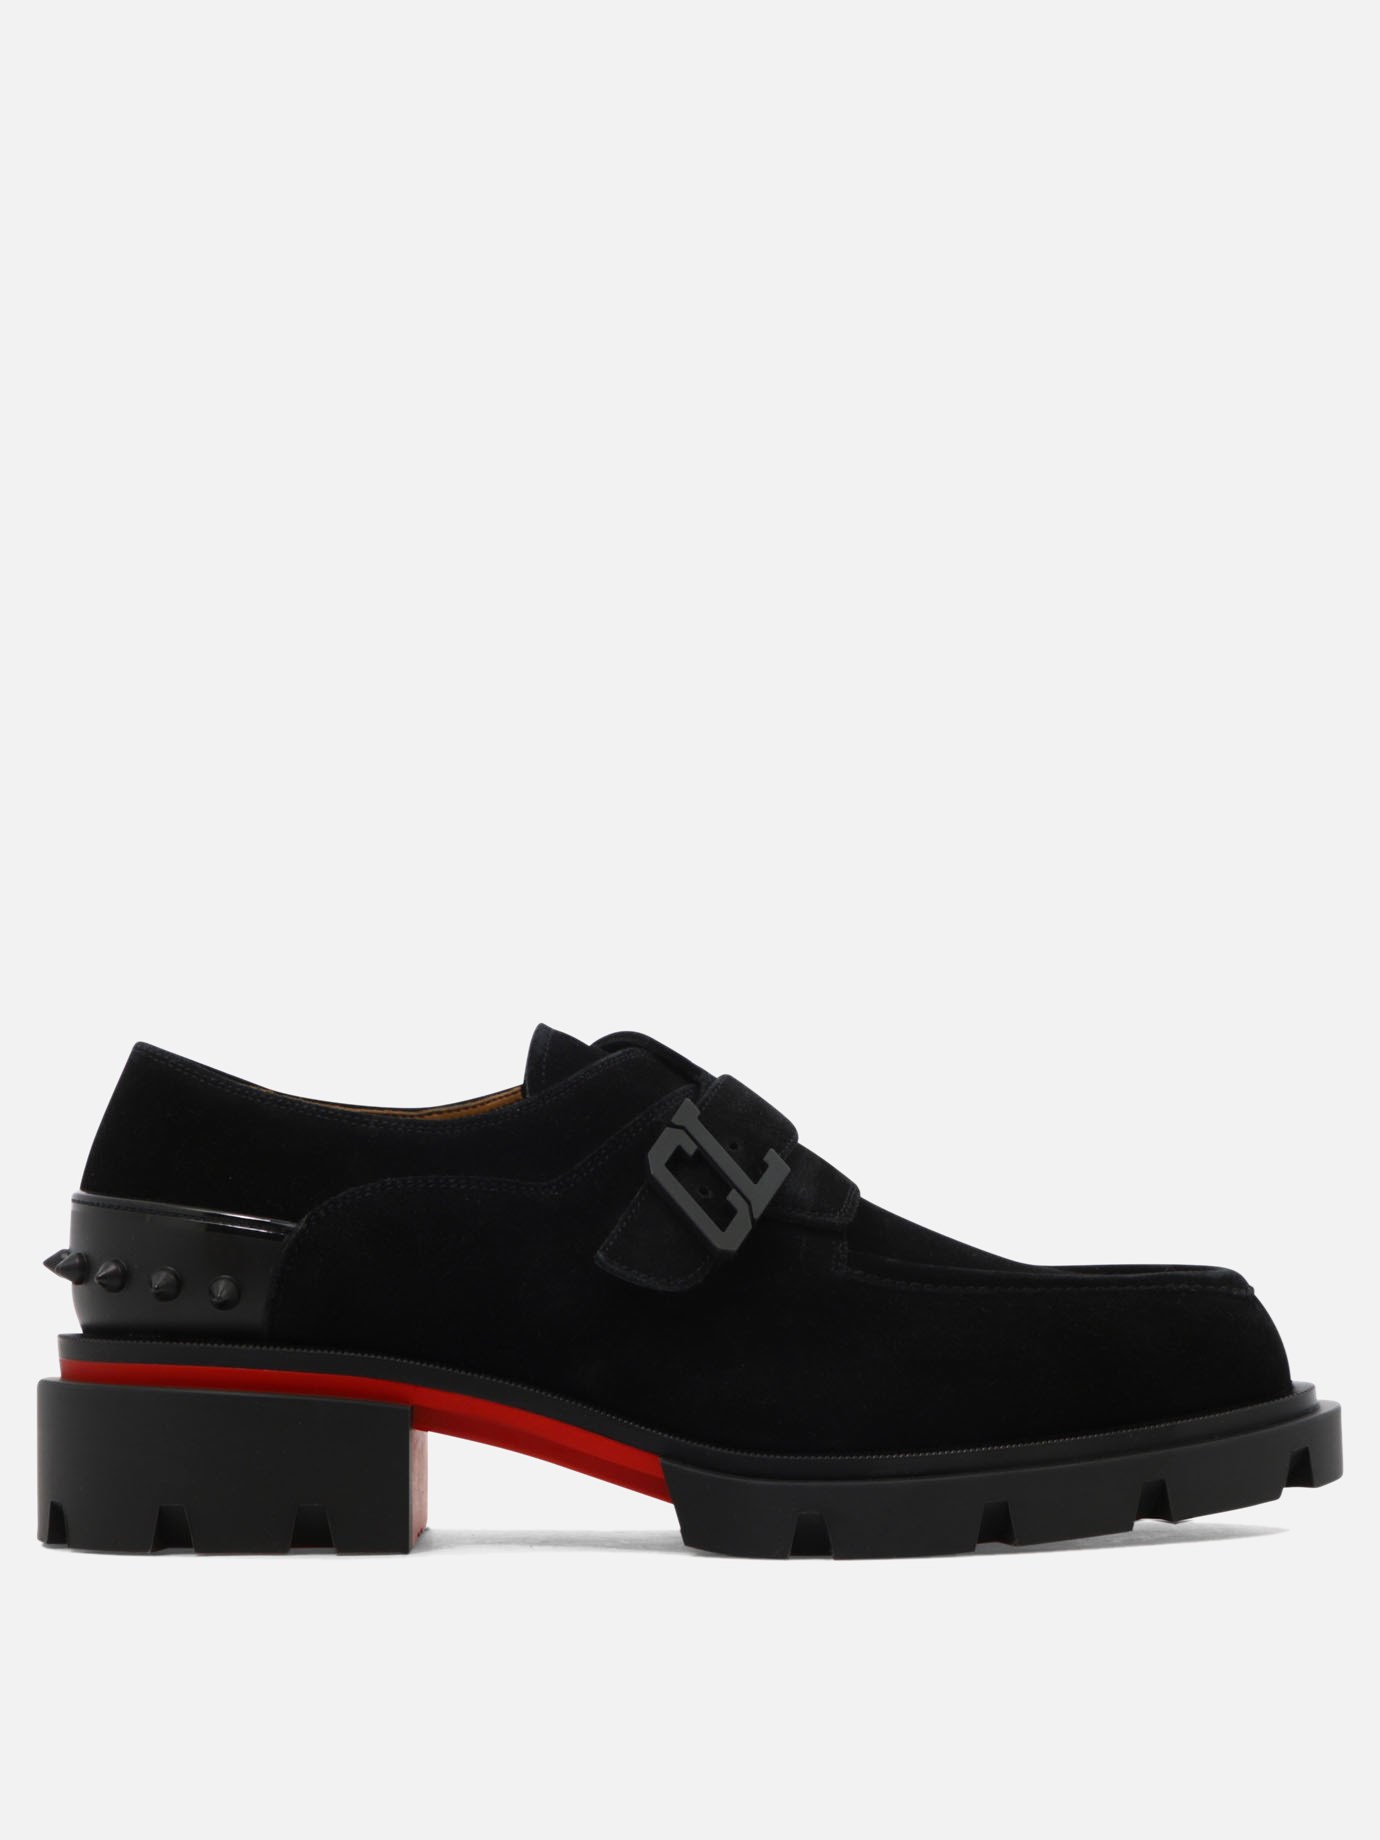 Monk  Our Georges Flat  by Christian Louboutin